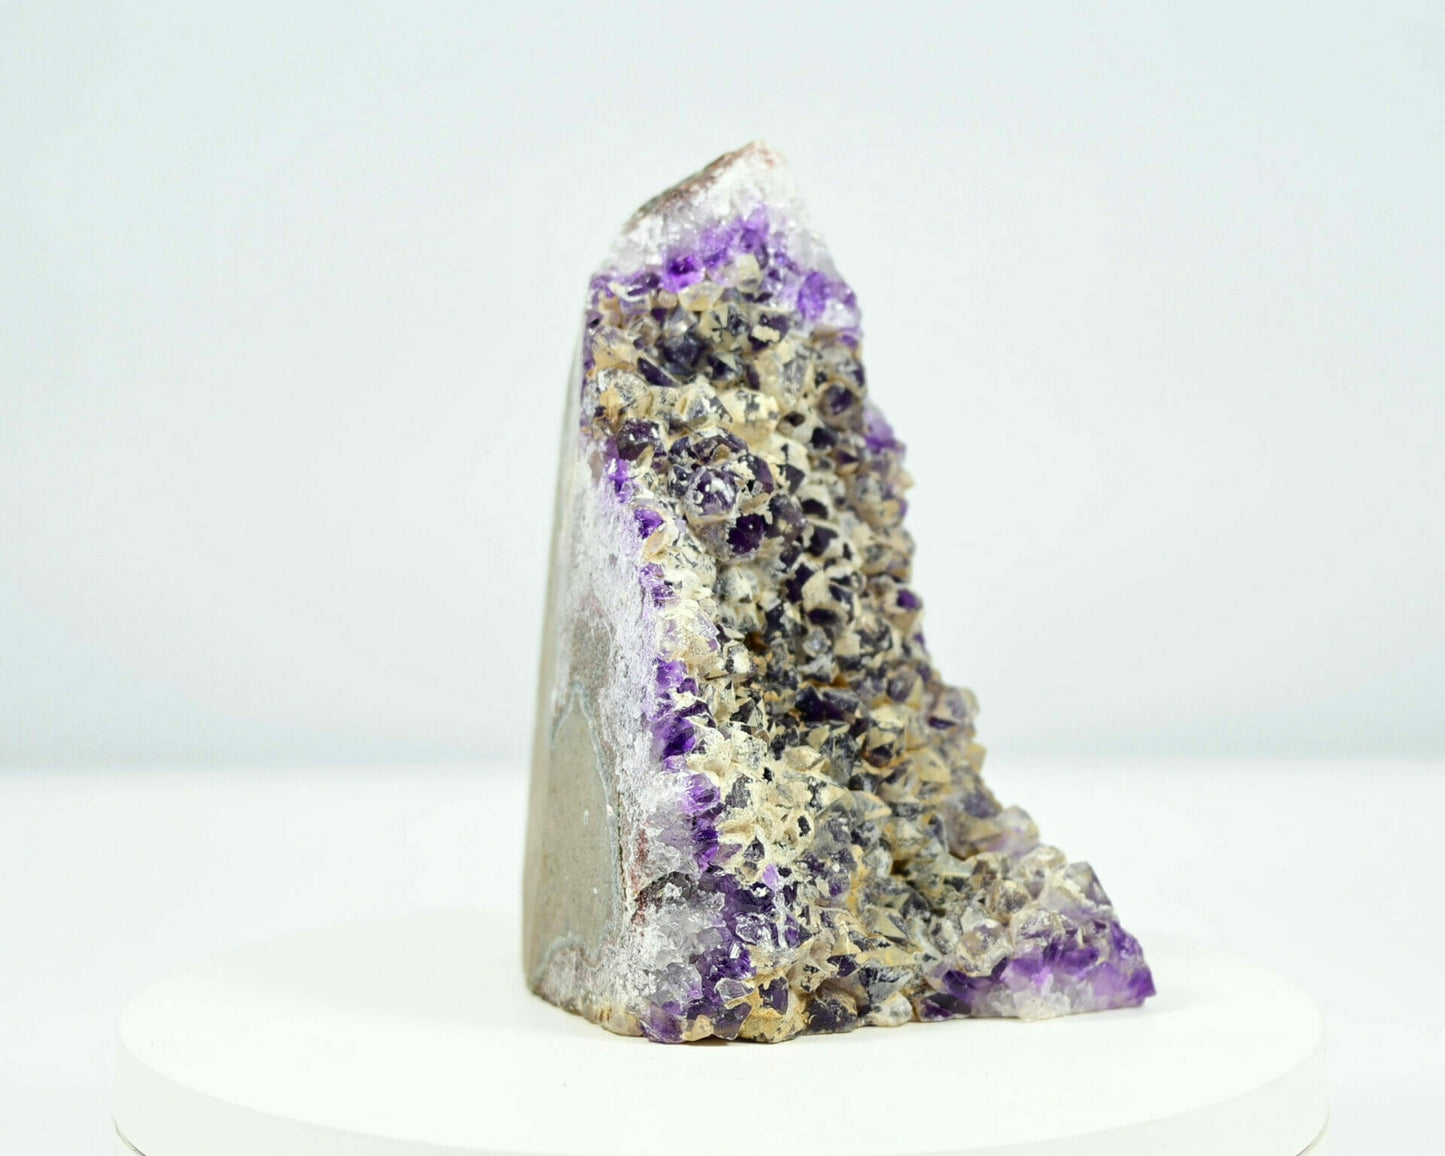 Unusal rare Amethyst covered with yellow second generation crystals